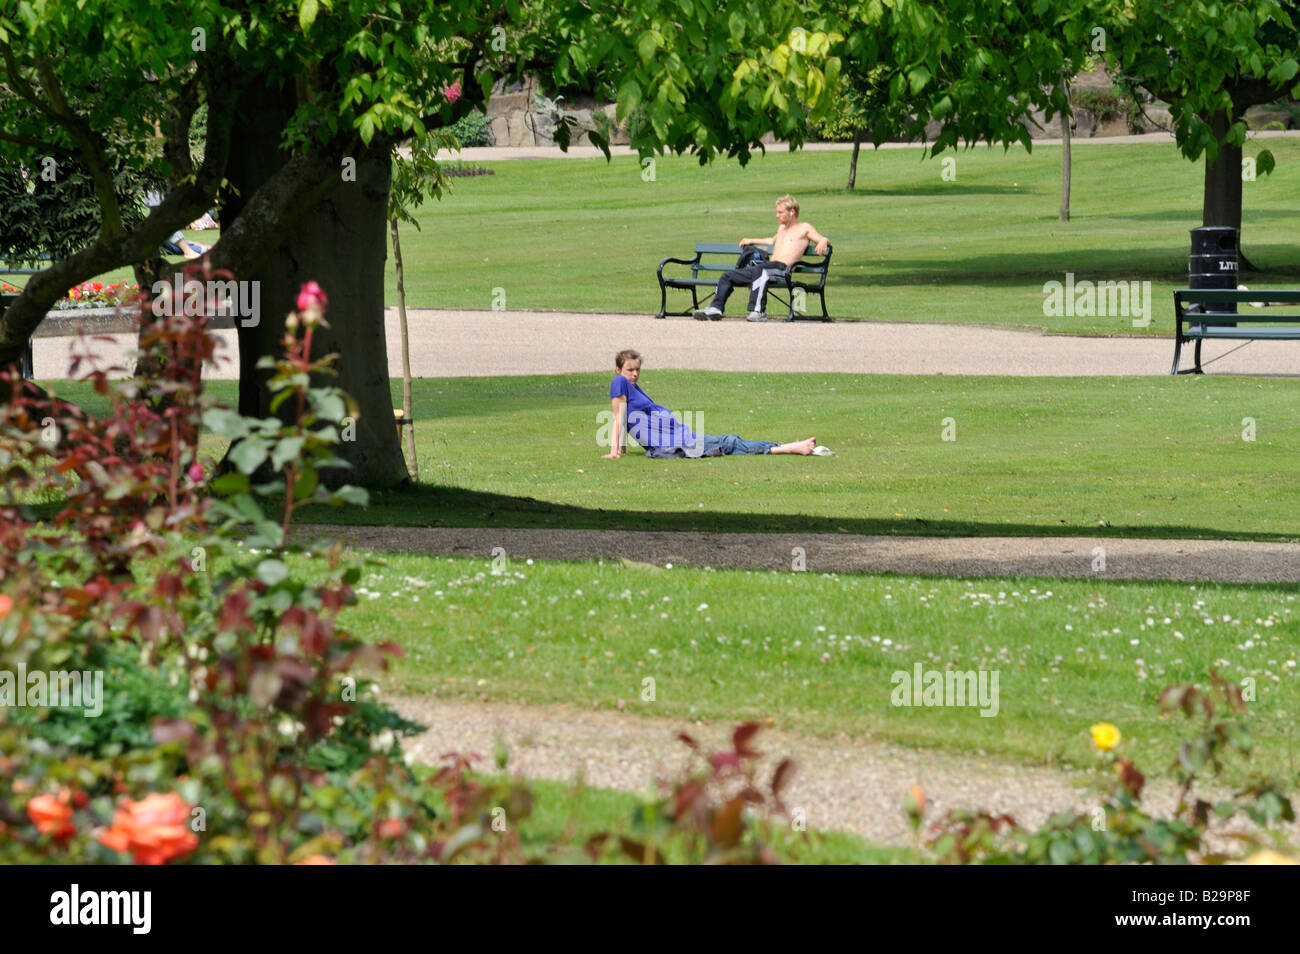 People In The Park: Sheffield's famous Botanical Gardens Park is very popular and attracts all manner of visitors of all ages. Stock Photo